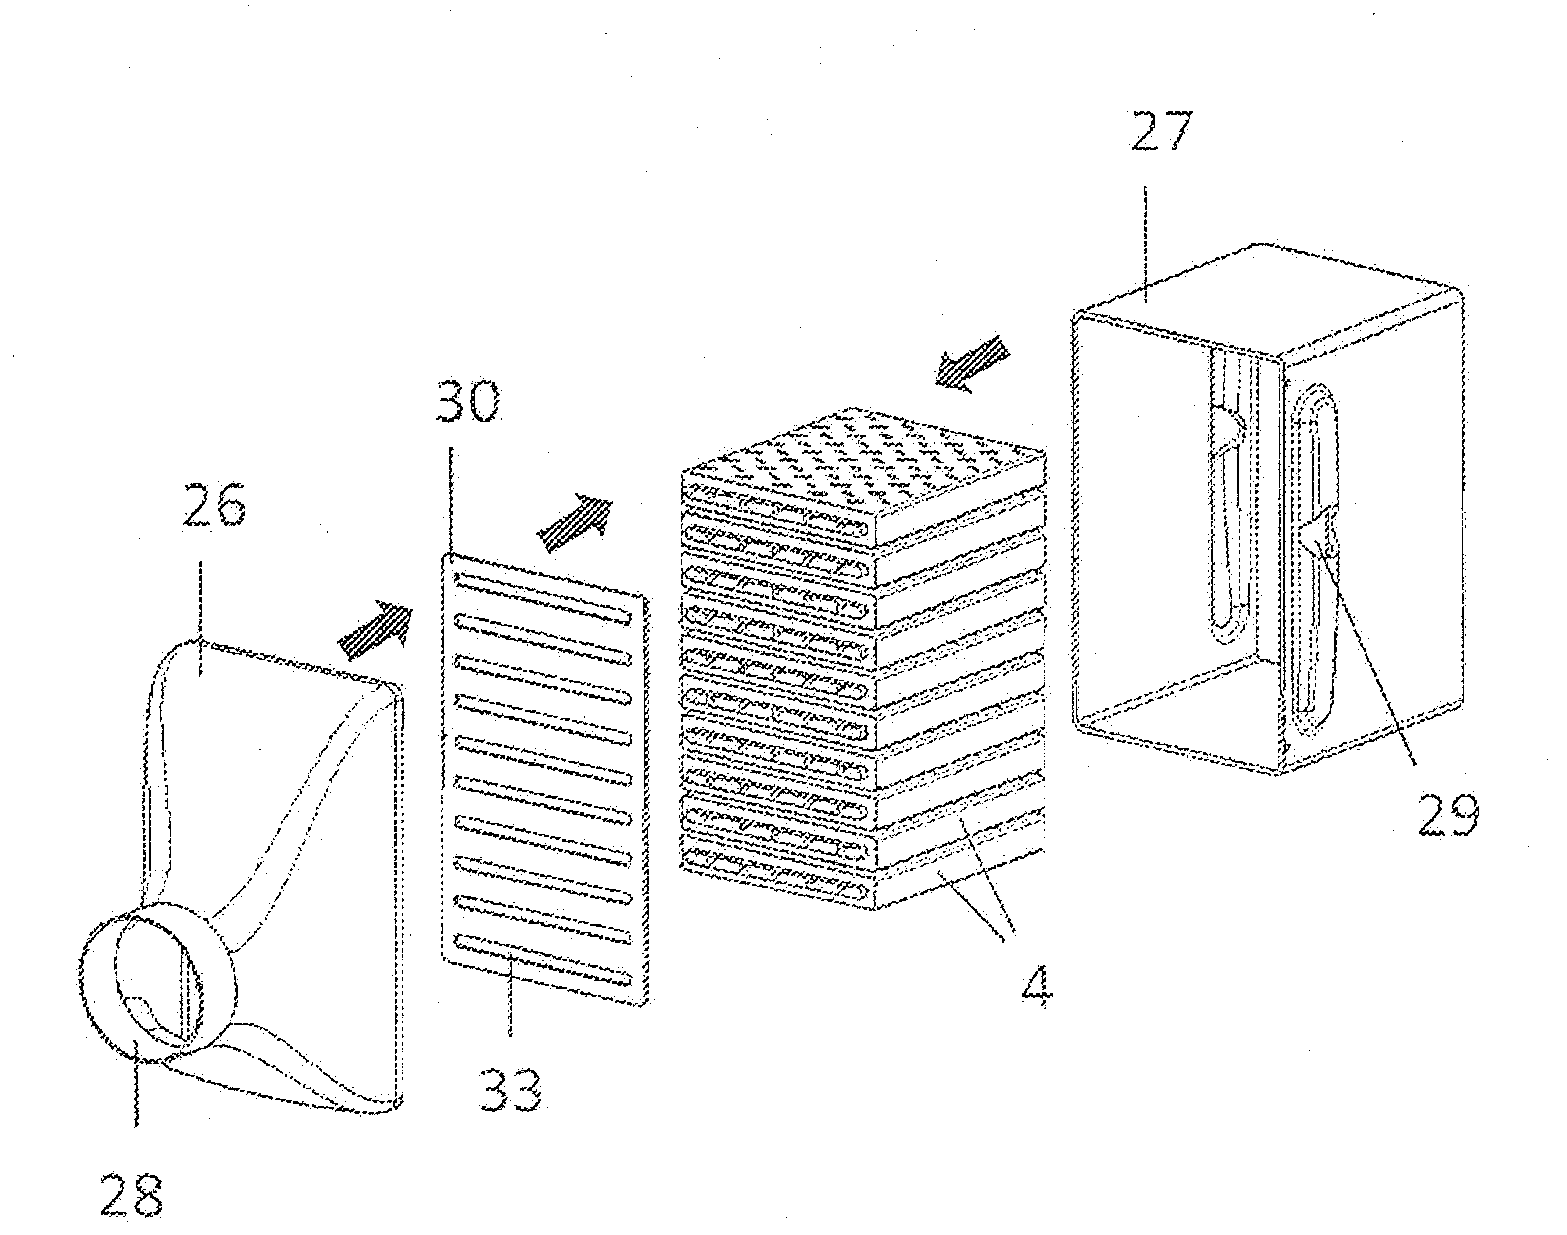 Thermoelectric unit